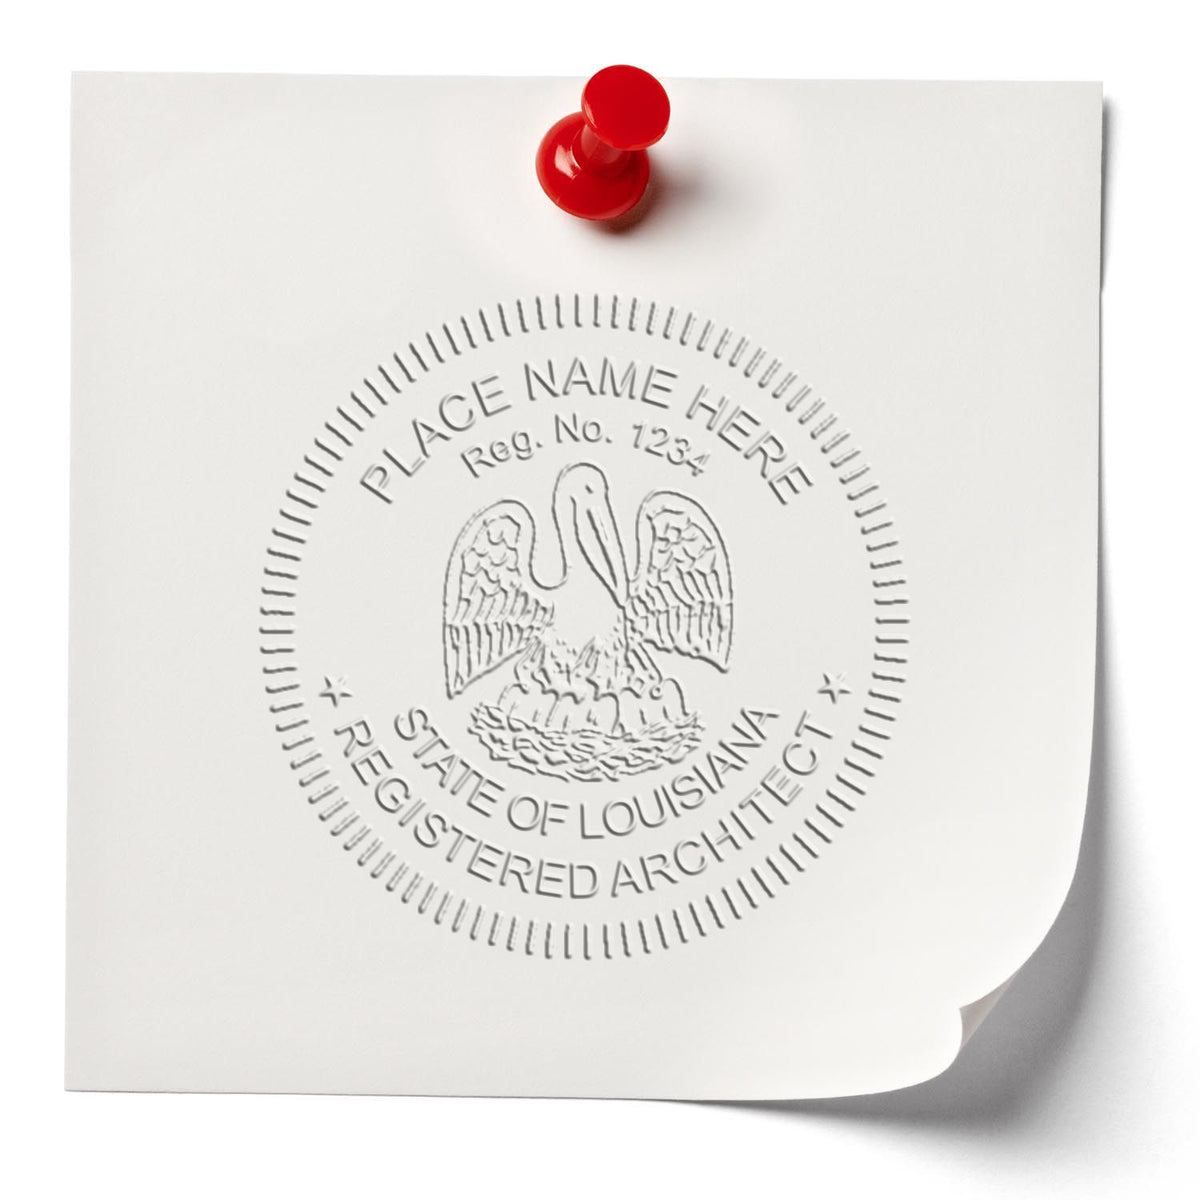 The State of Louisiana Long Reach Architectural Embossing Seal stamp impression comes to life with a crisp, detailed photo on paper - showcasing true professional quality.